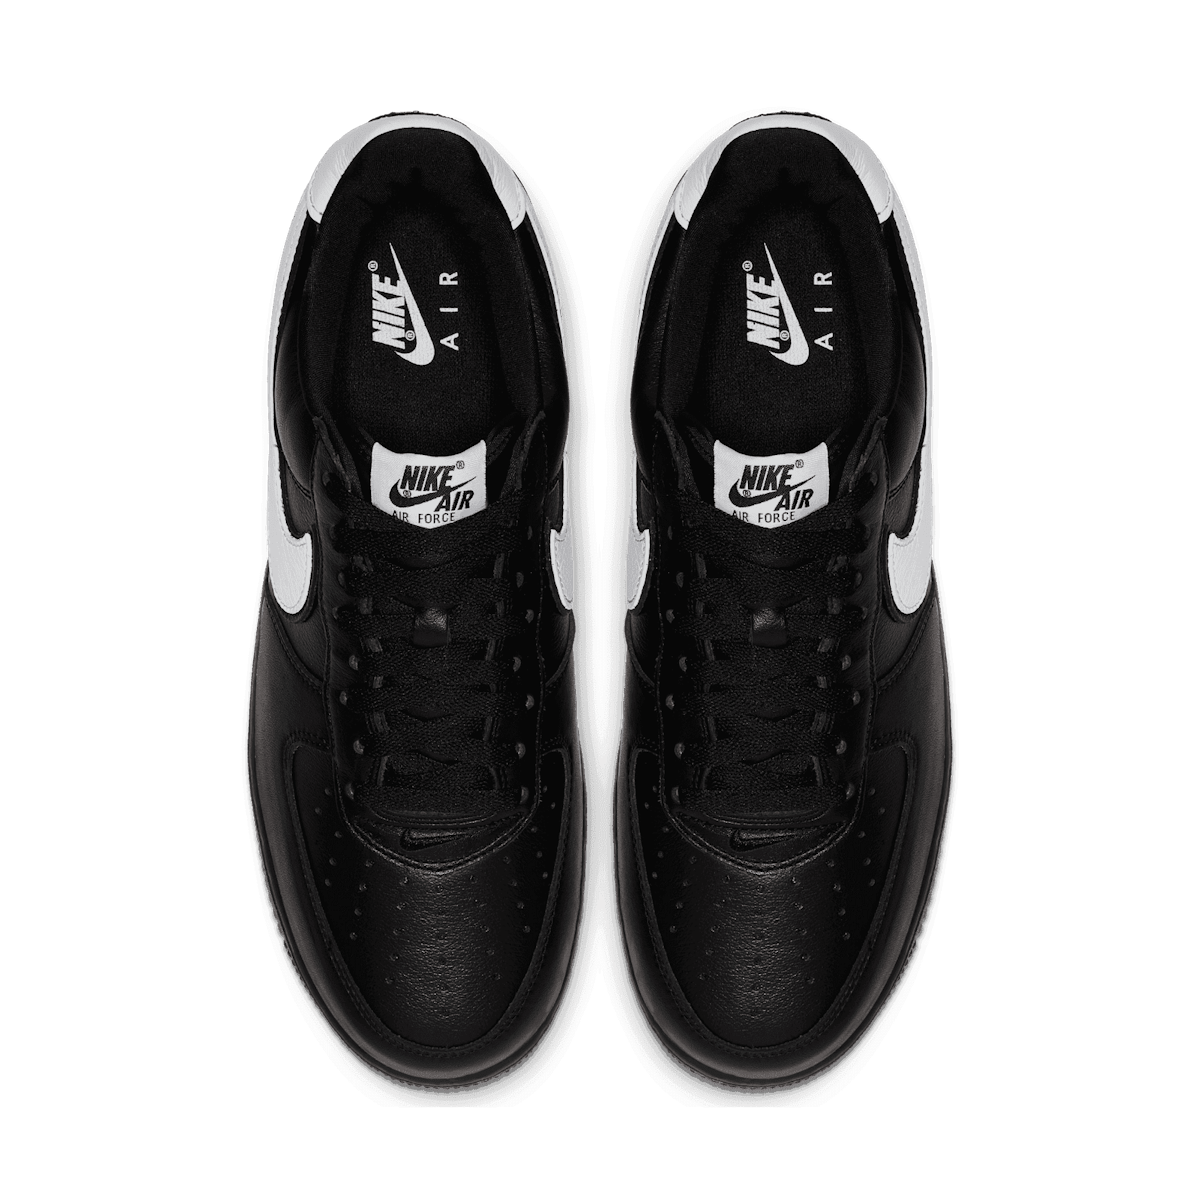 Nike Air Force 1 Low QS Black White - CQ0492-001 Raffles and Release Date